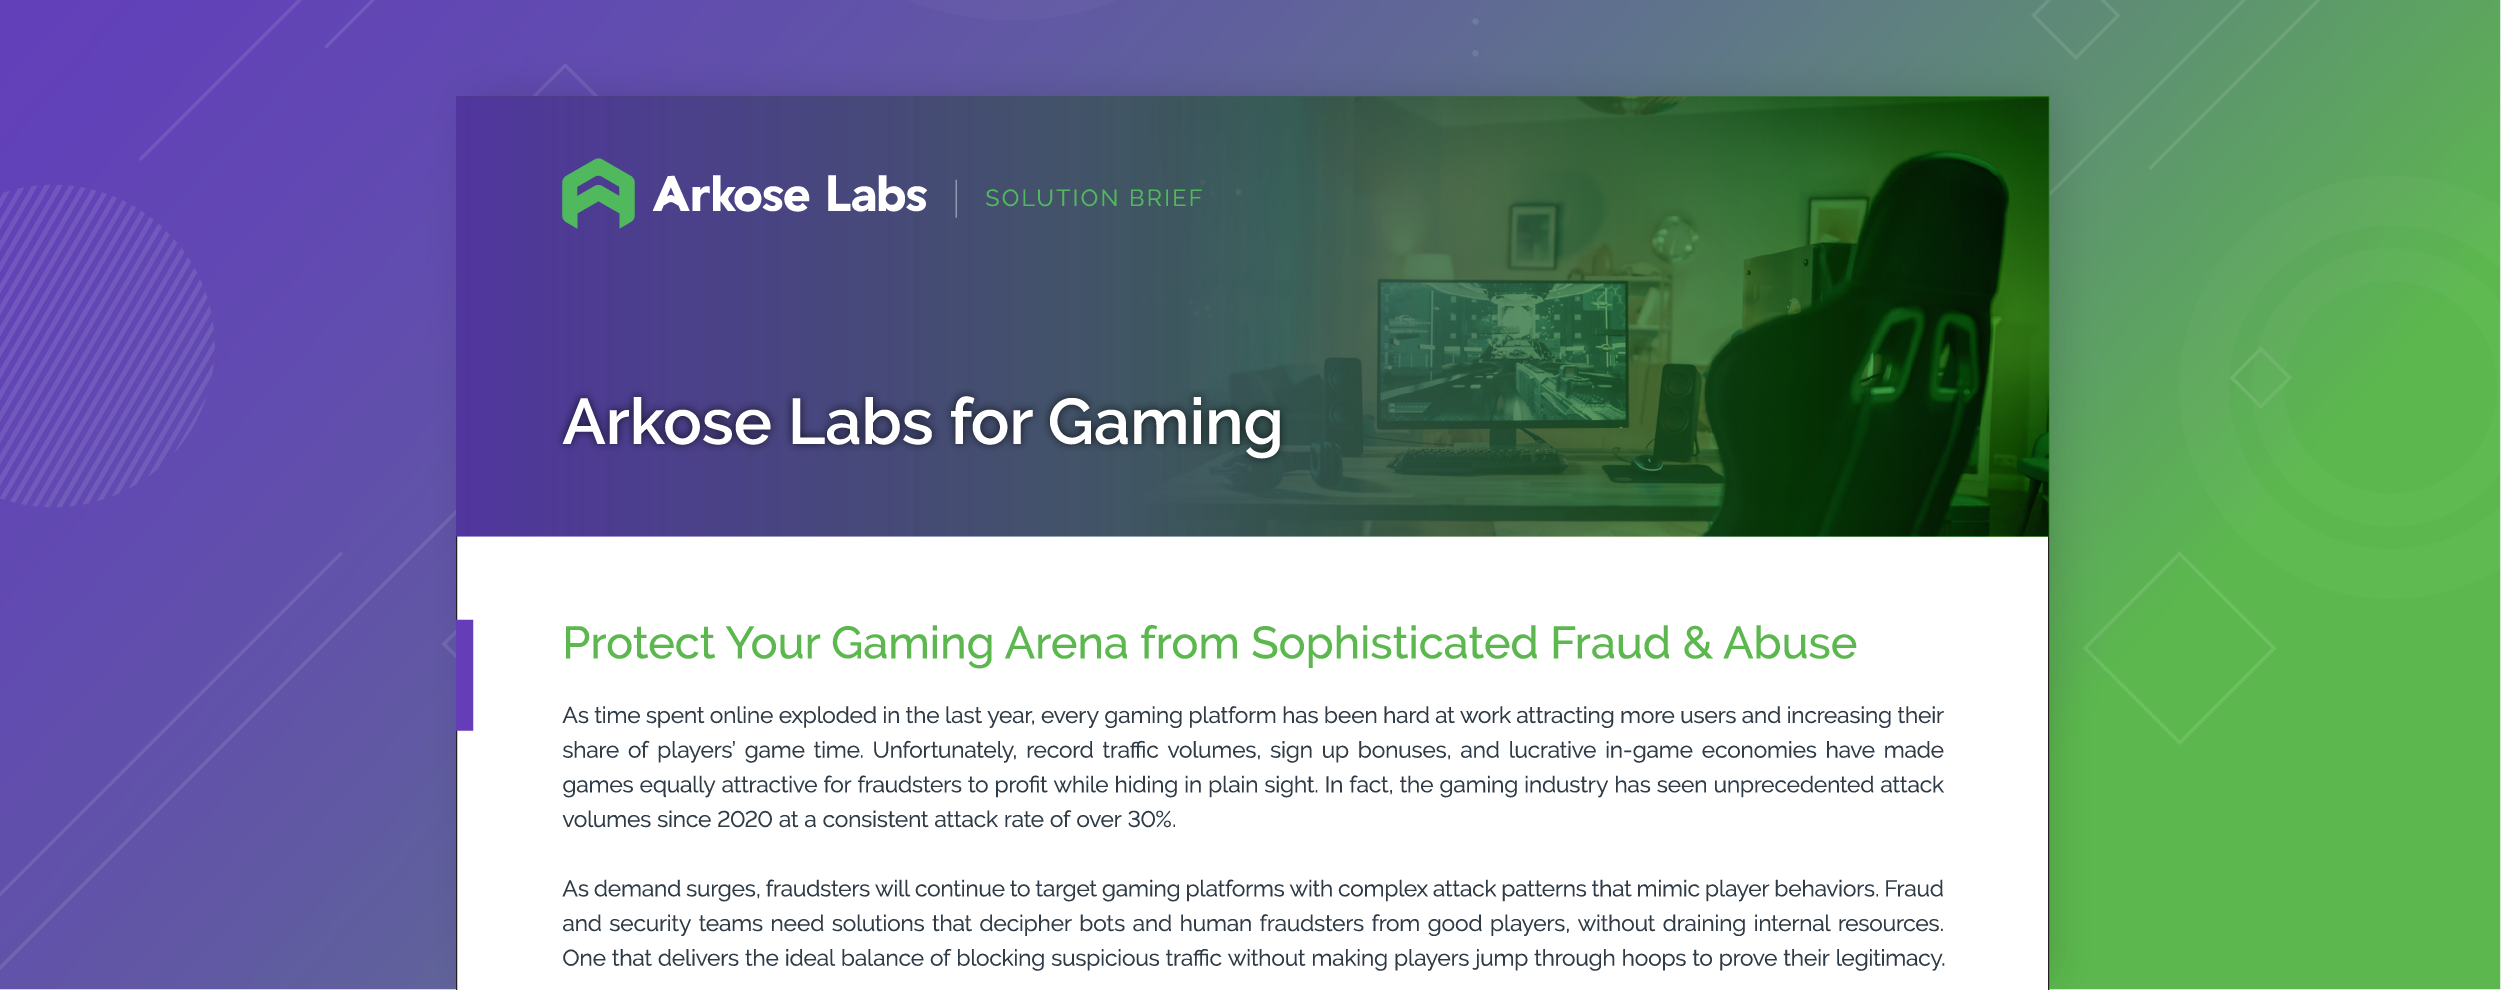 Arkose Labs for Gaming solution brief